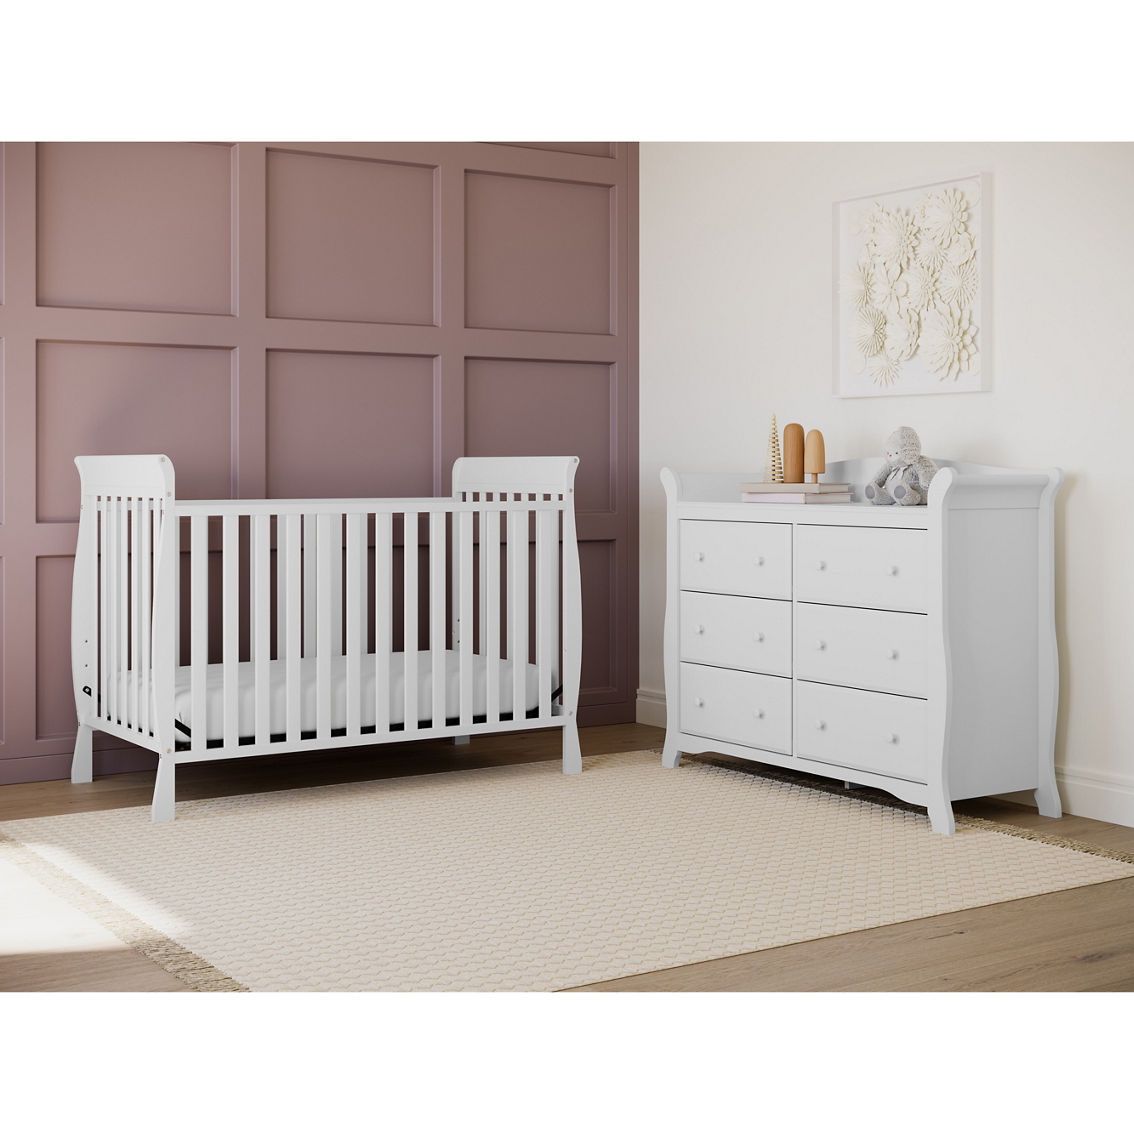 Storkcraft Maxwell 3-in-1 Convertible Crib - Image 1 of 7